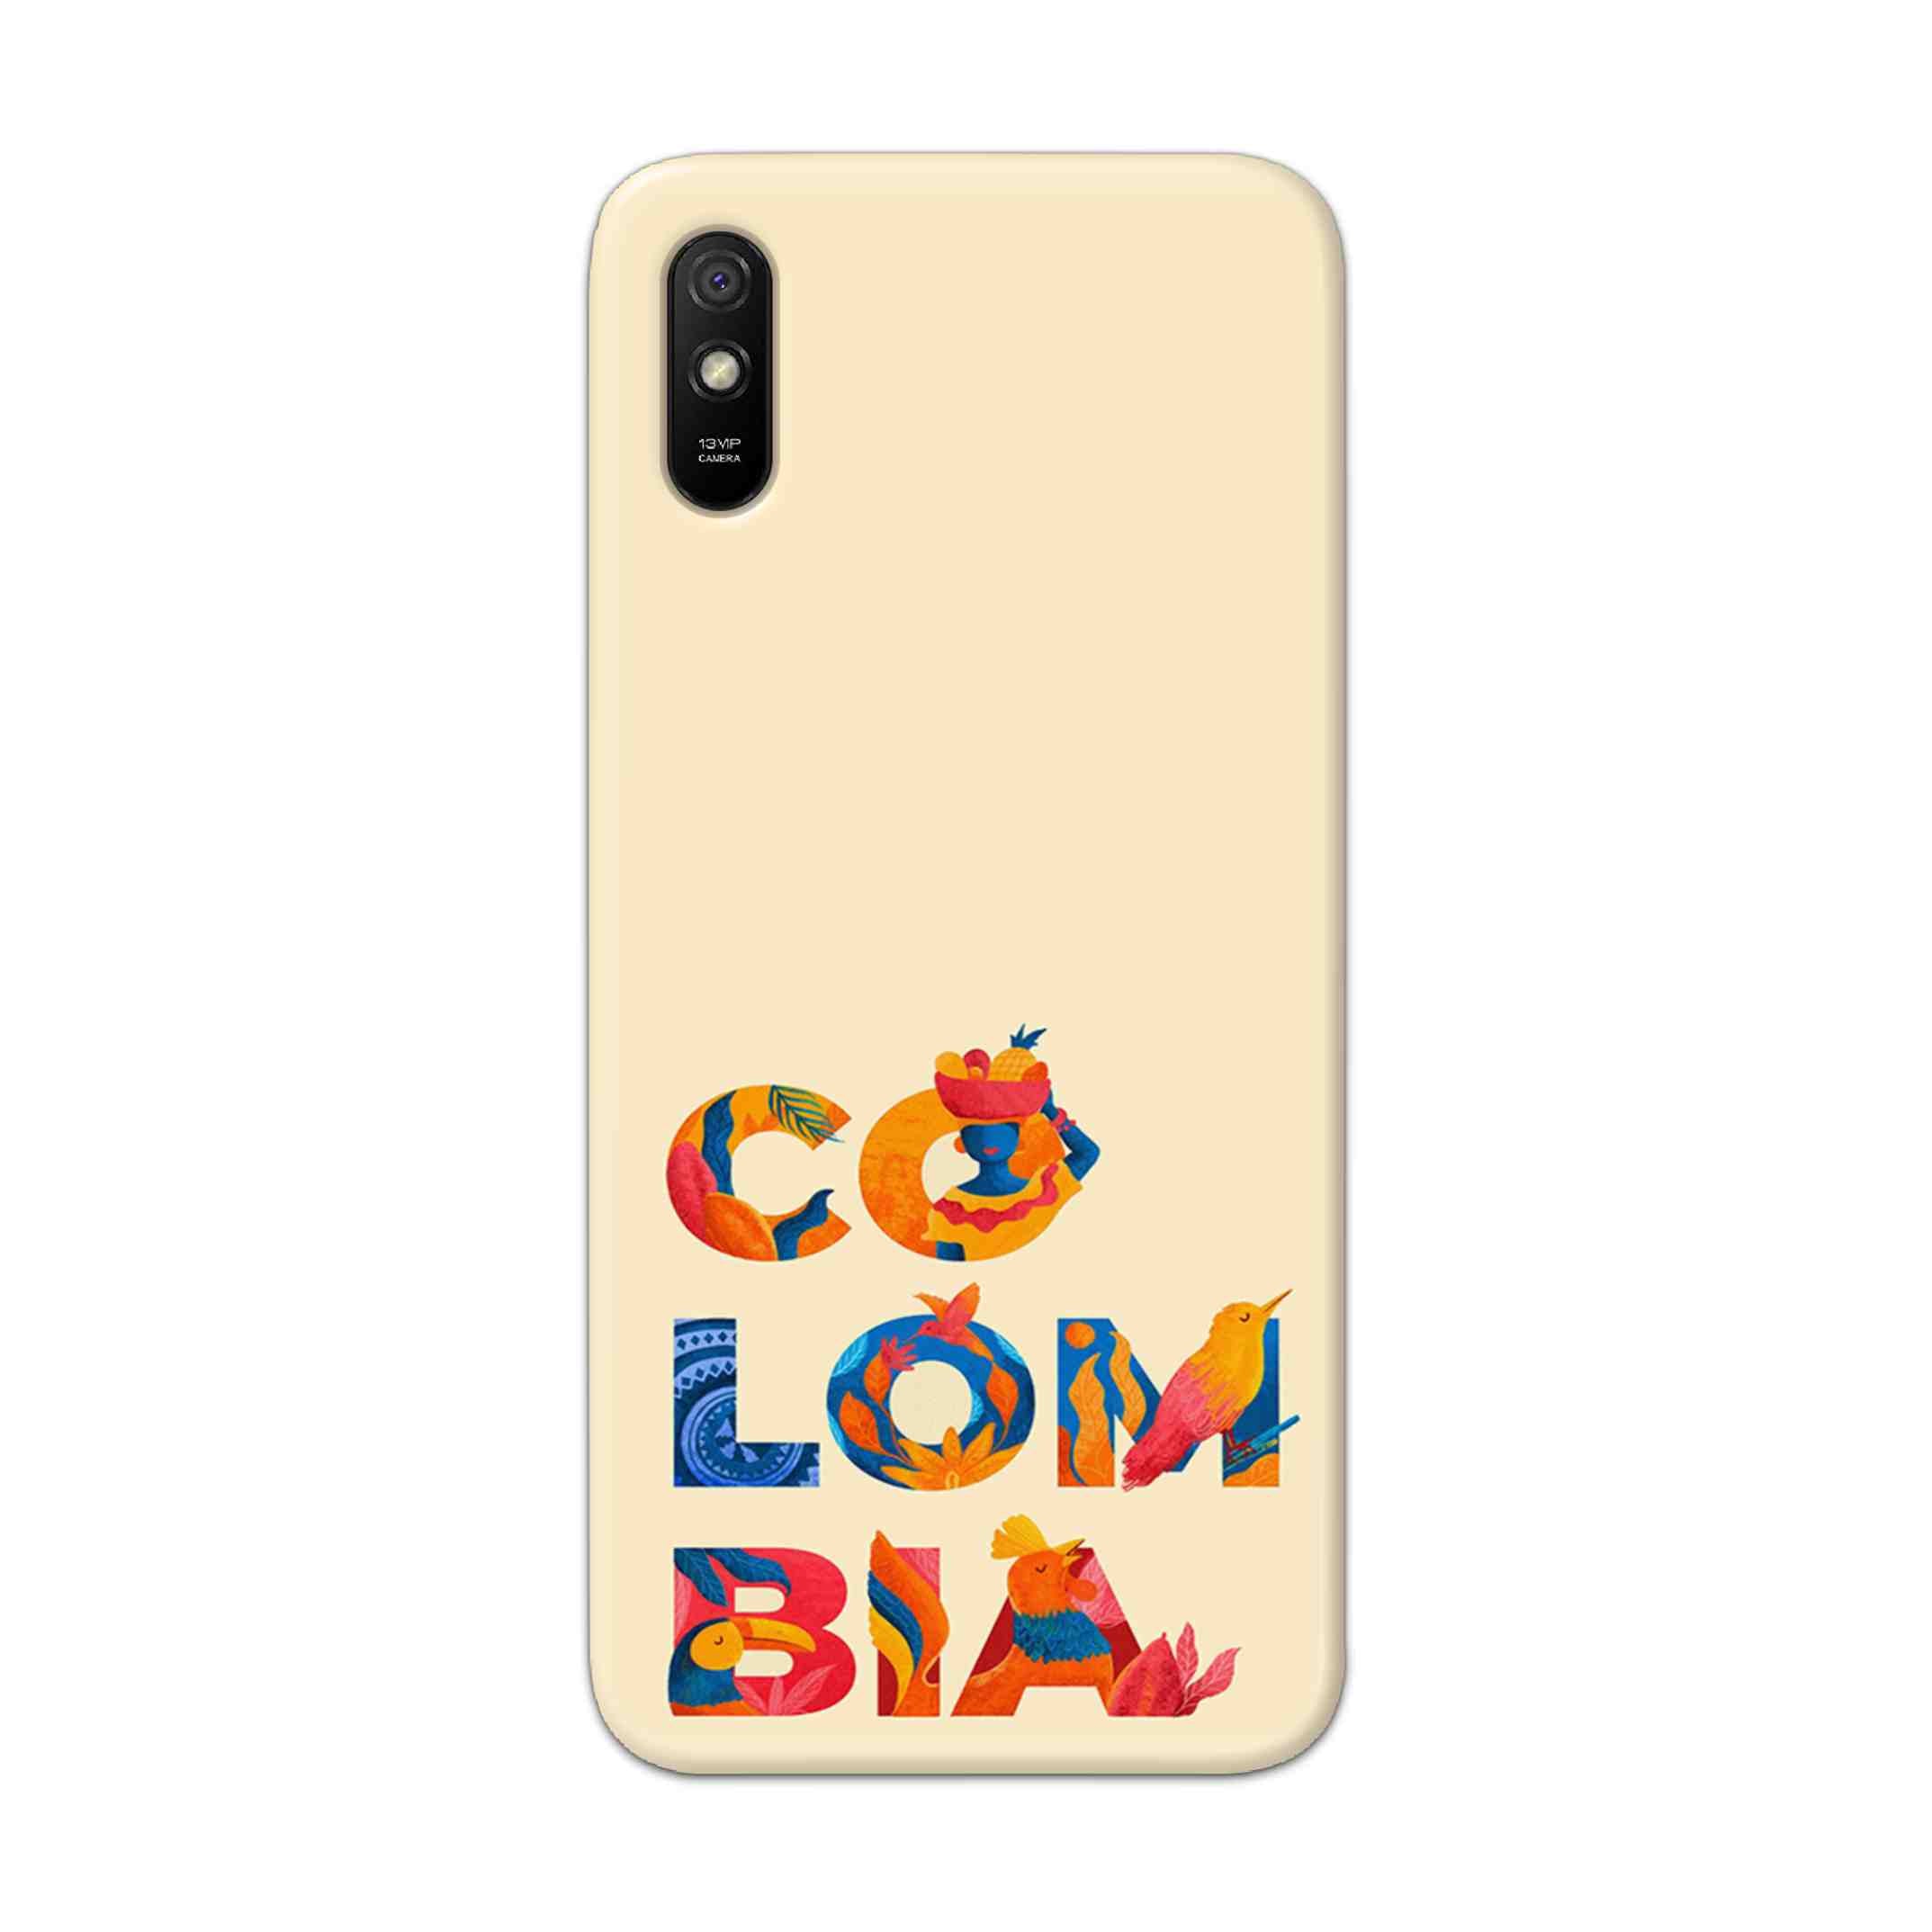 Buy Colombia Hard Back Mobile Phone Case Cover For Redmi 9A Online